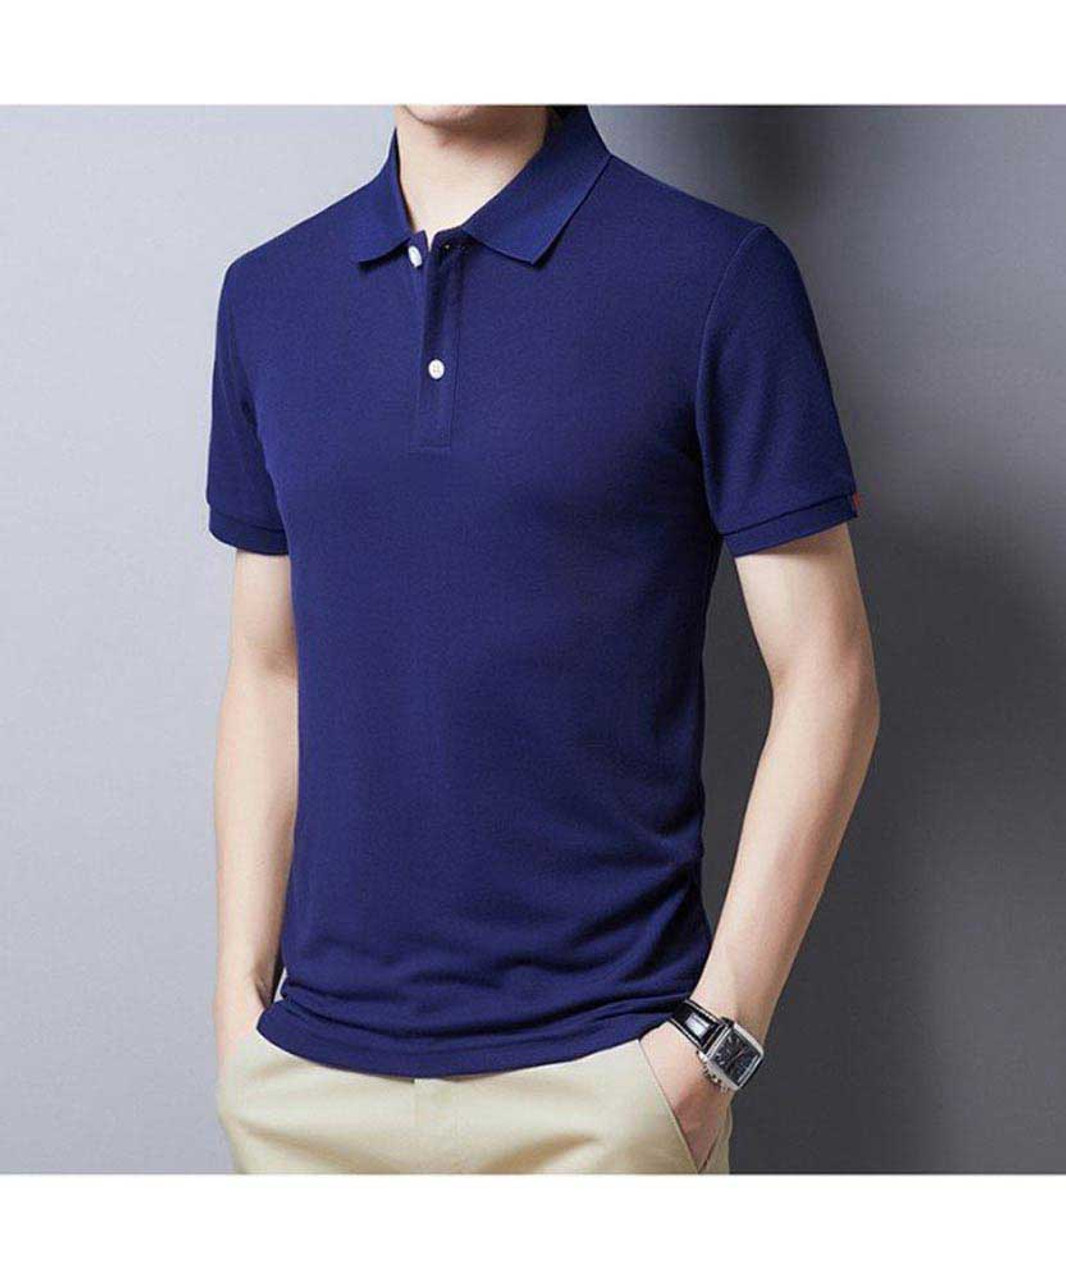 antage debitor ventilation Navy plain pull over short sleeve polo | Mens polo shirts online 1514MCLO